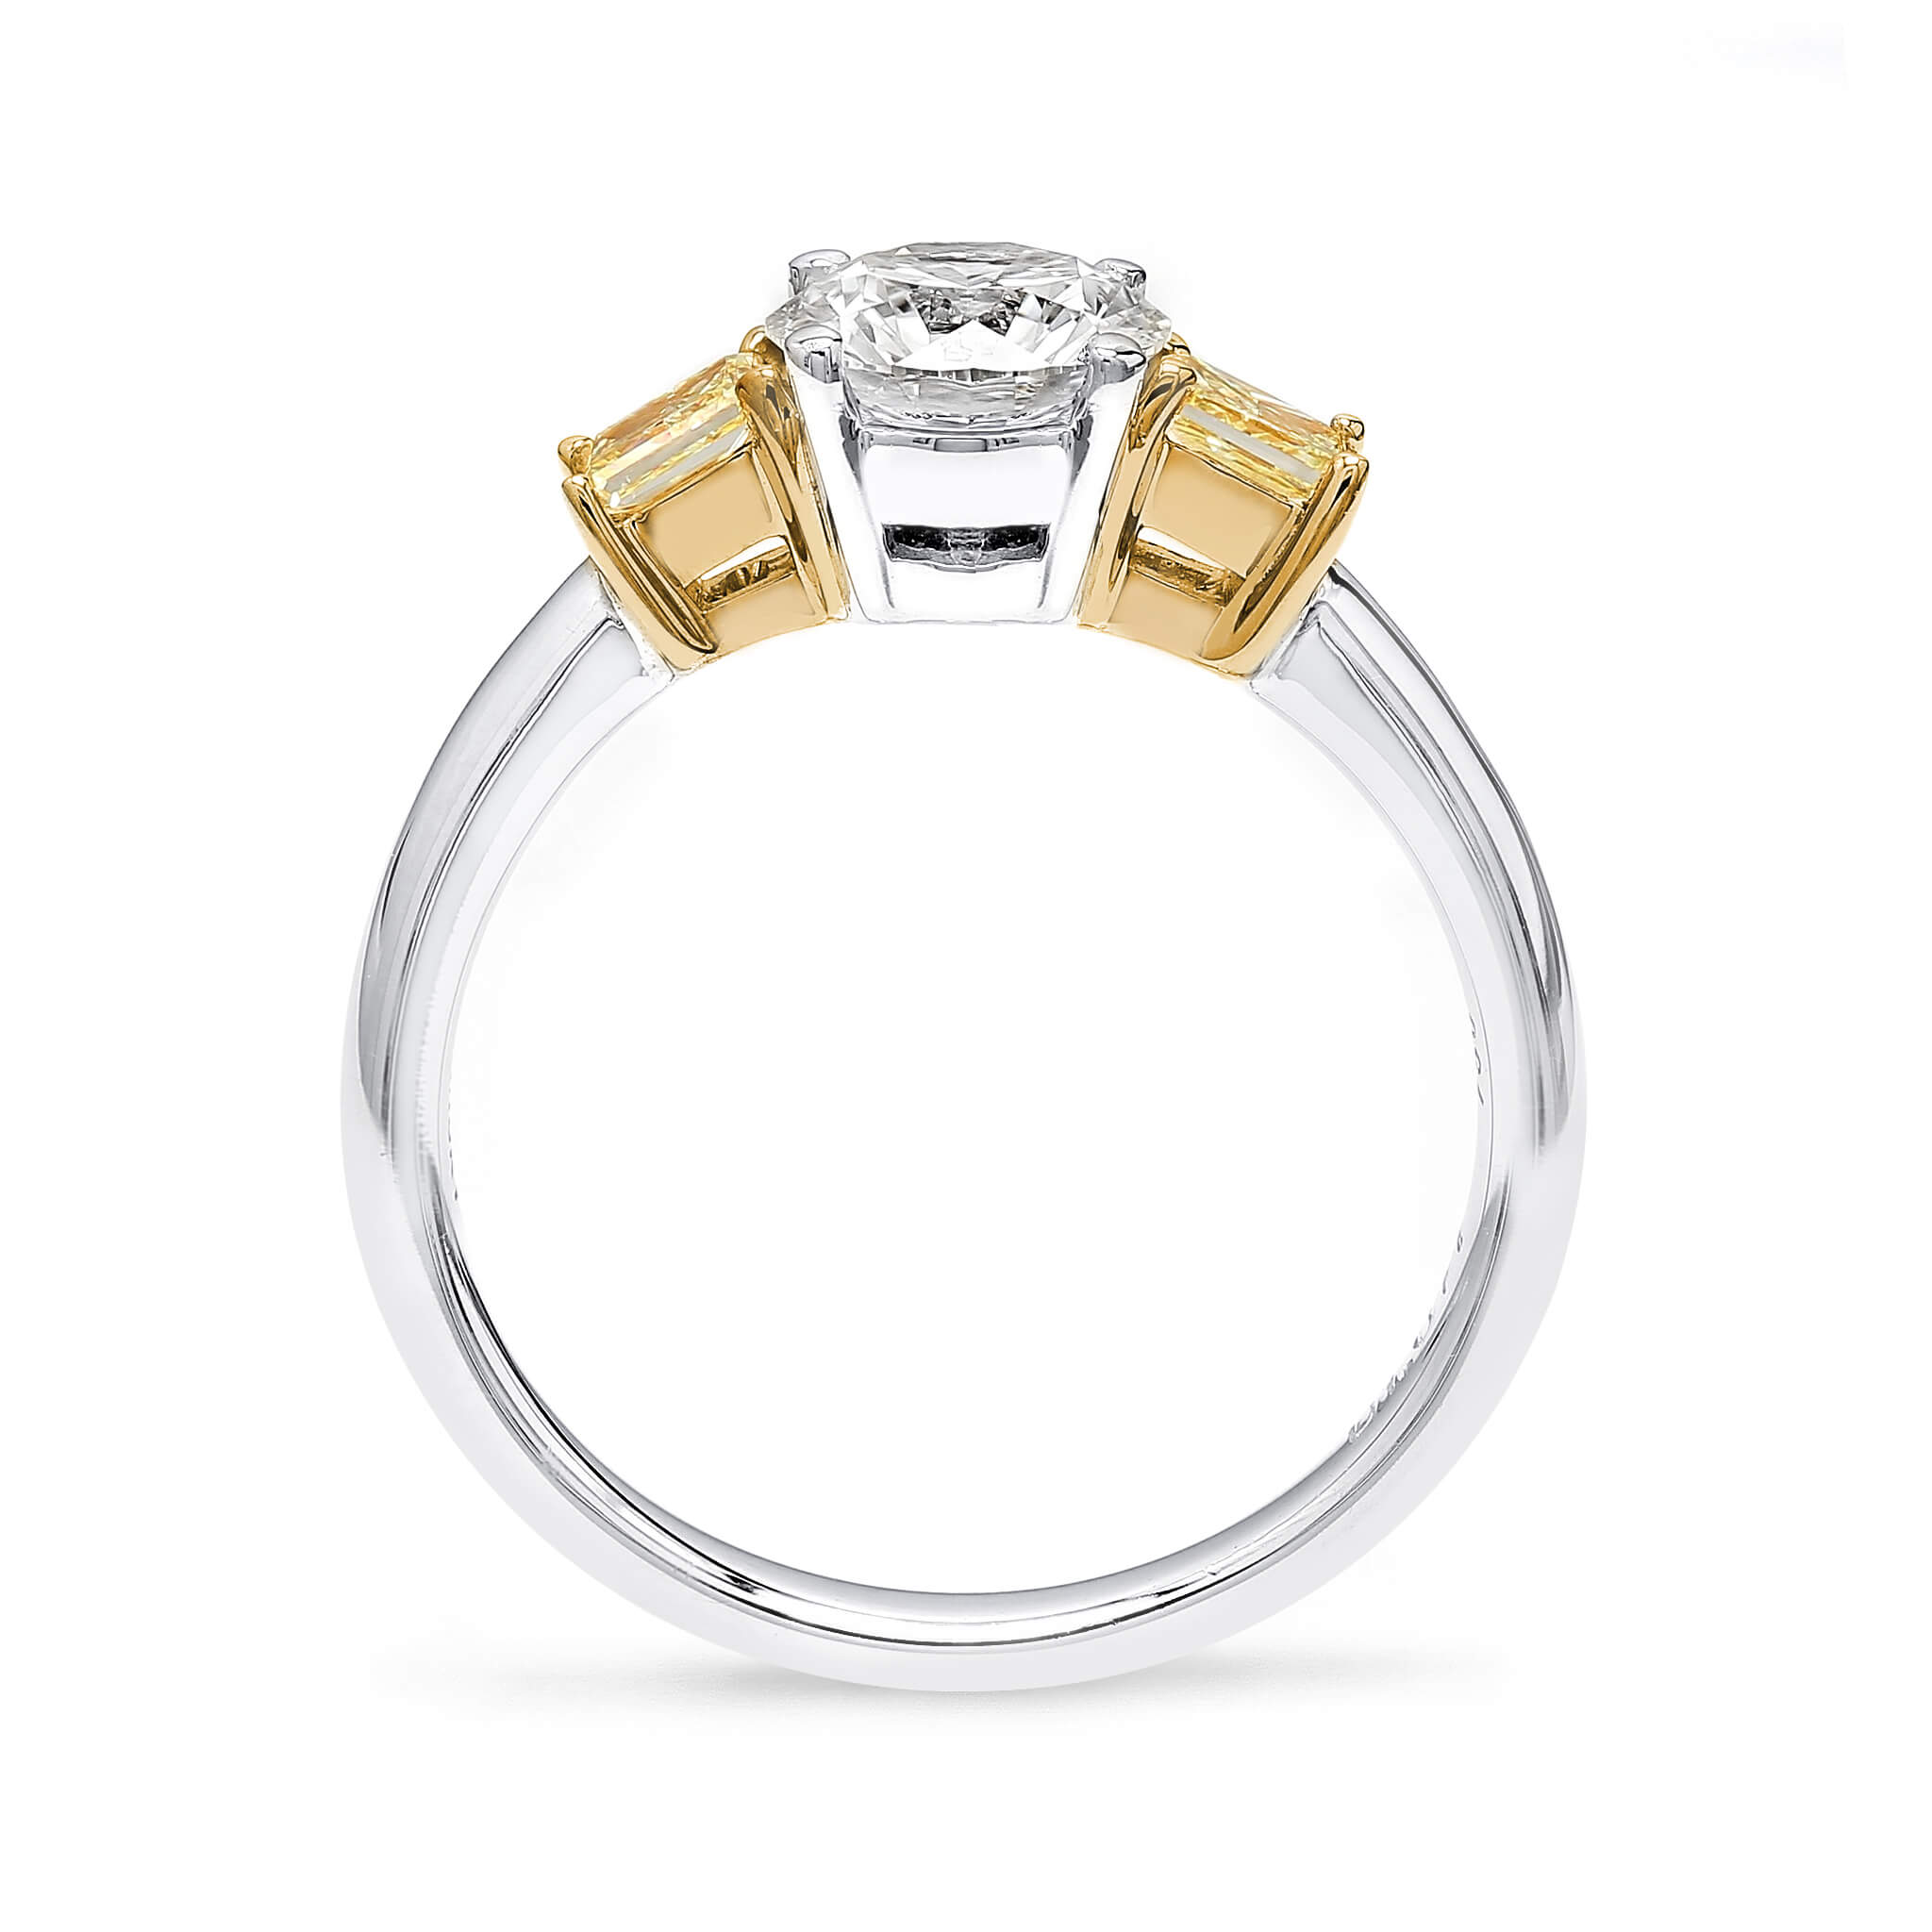 Shimansky - Yellow Diamond Trilogy Ring 1.00ct crafted in 18K White and Yellow Gold